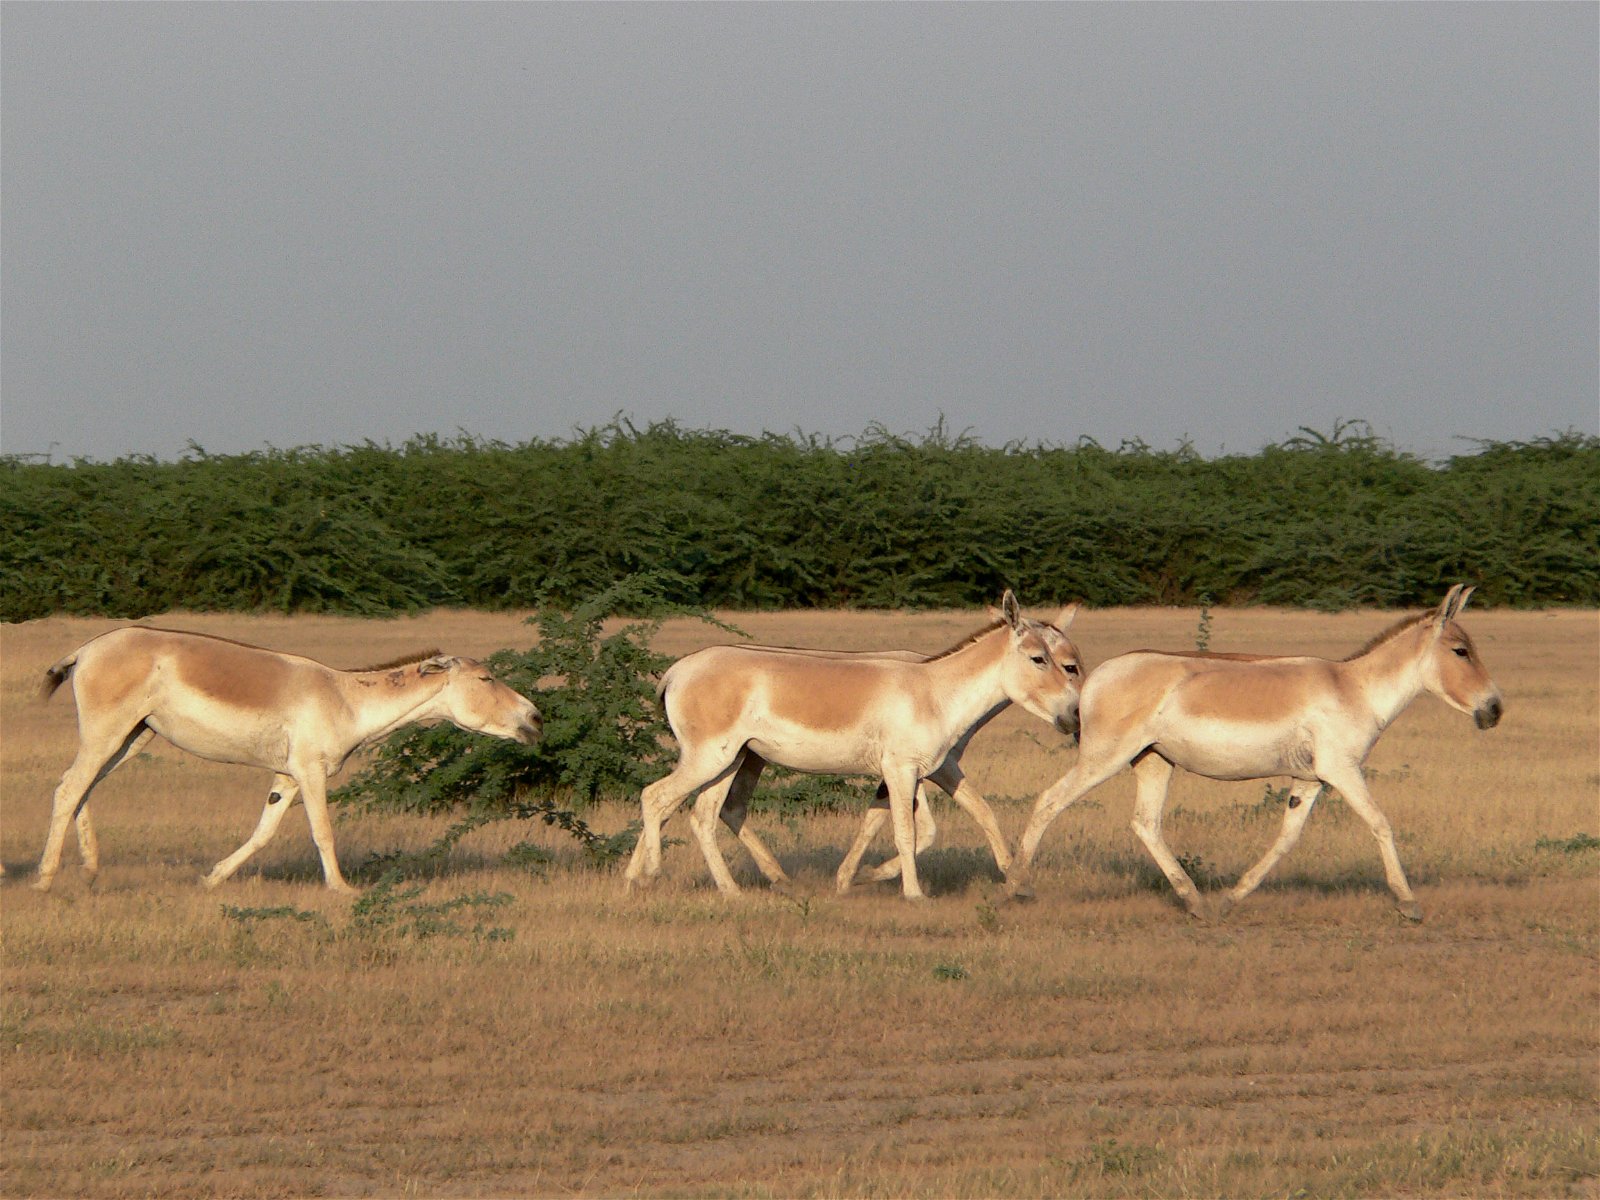 A group of animals walking in a field with Indian Wild Ass Sanctuary in the background
Description automatically generated